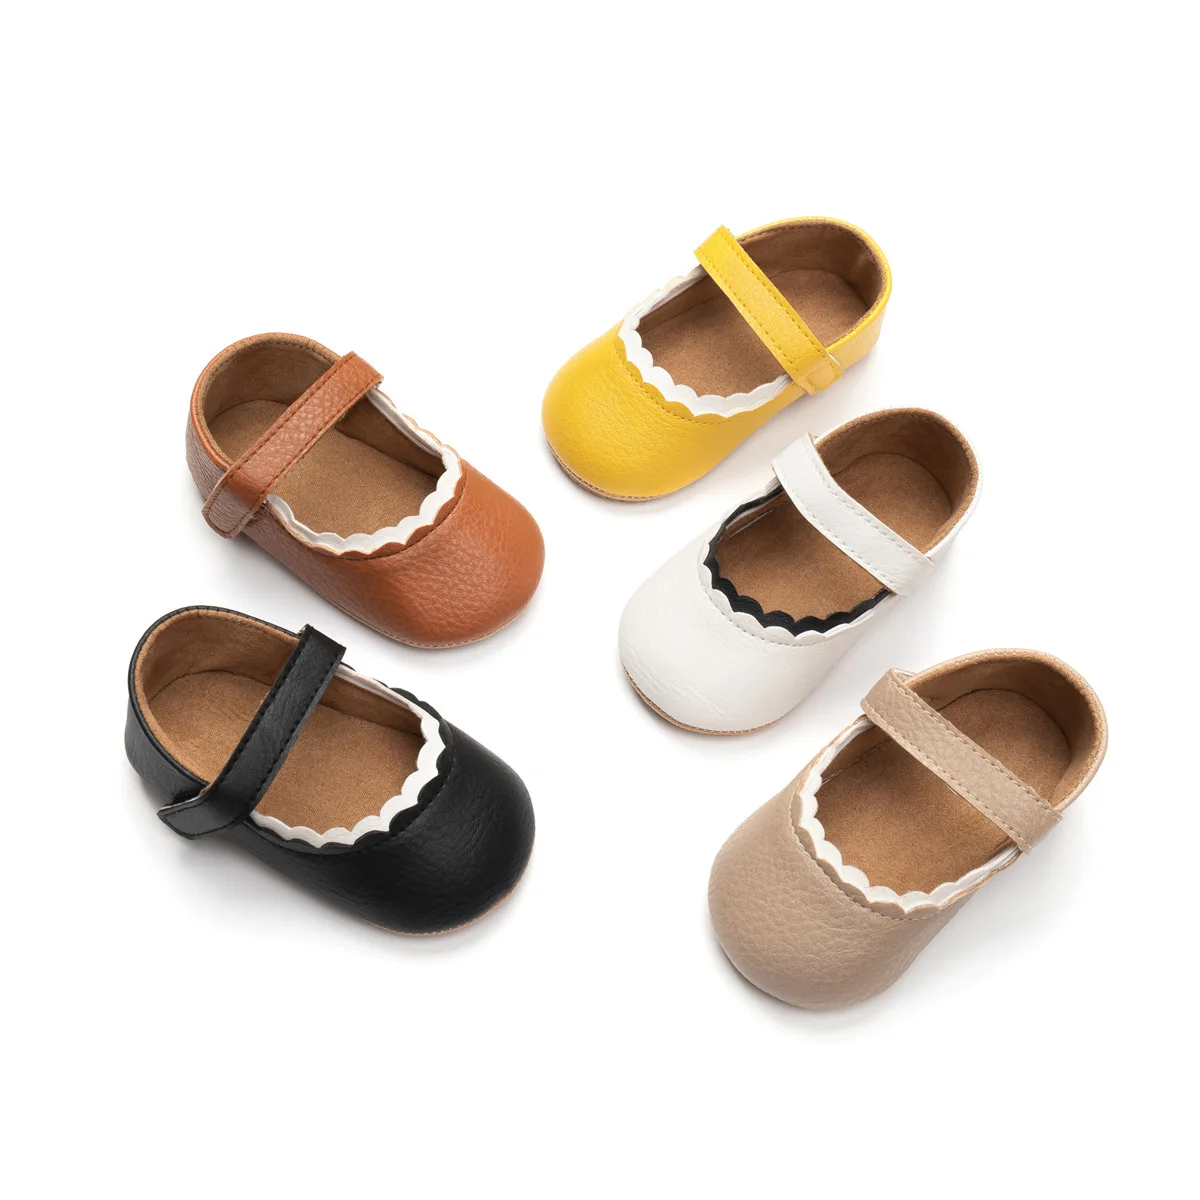 Luxury Soft Leather Baby Princess Shoes Newborn Girls Moccasins Shoes Rubber Sole Prewalker Non-slip Hollow Summer First Walkers